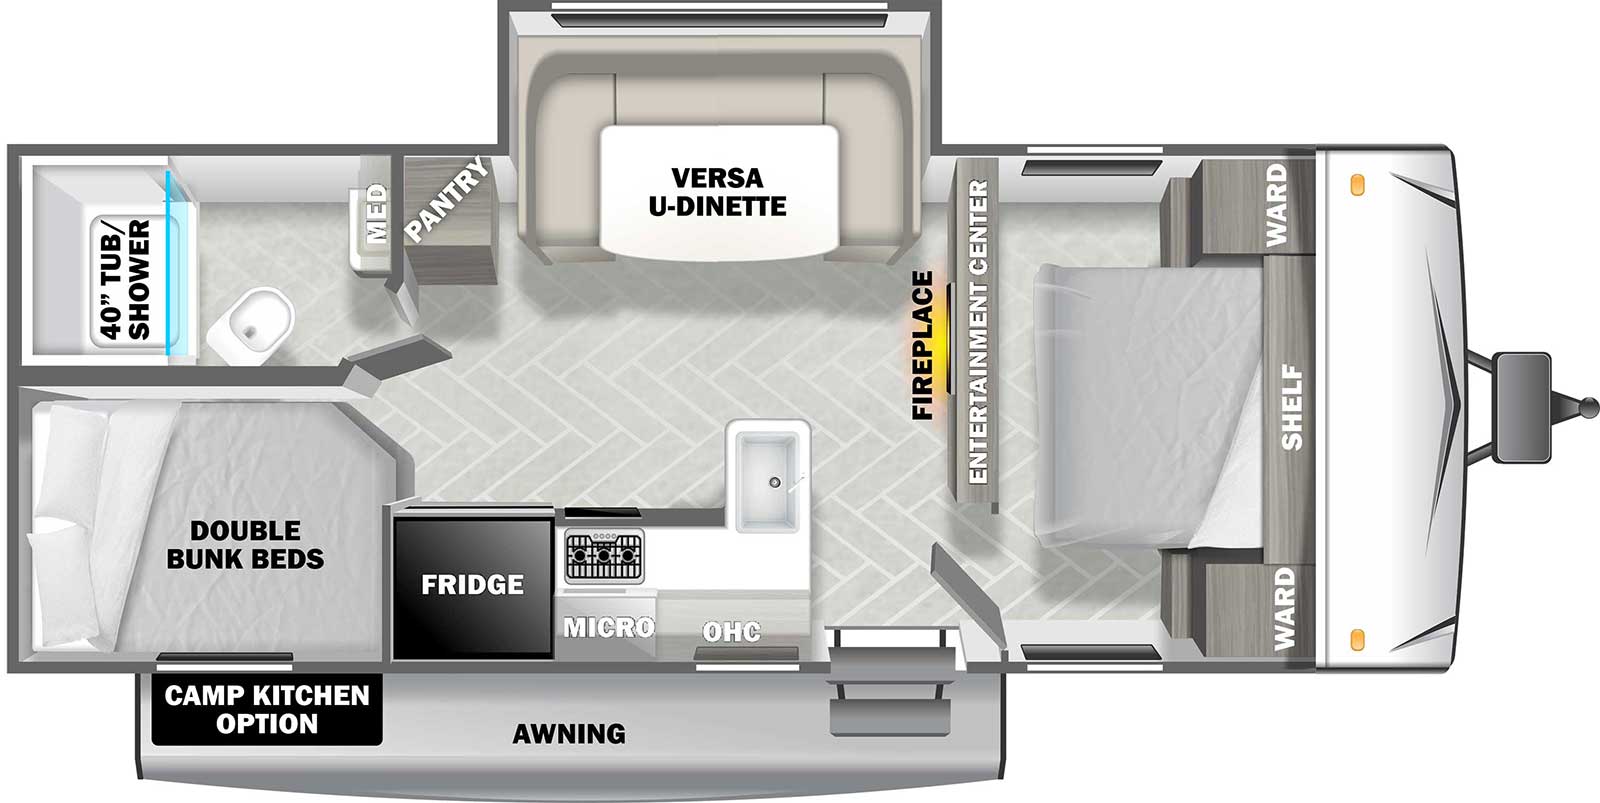 Cruise Lite West T241BHXL floorplan. The T241BHXL has one slide out and one entry door.